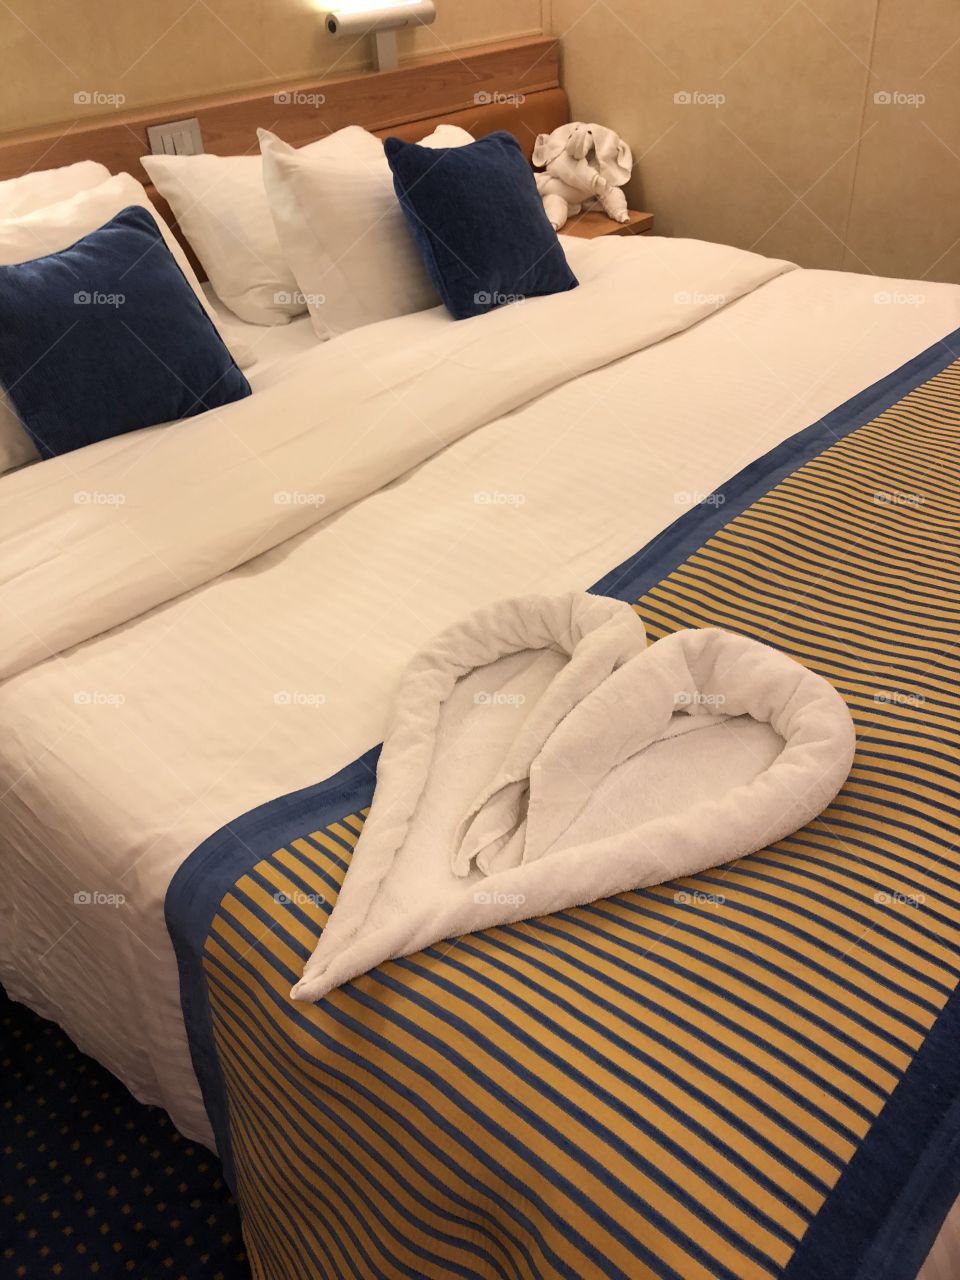 Carnival Sunshine Cruise towel animal, heart, made by our room Stuart on Valentine’s Day 